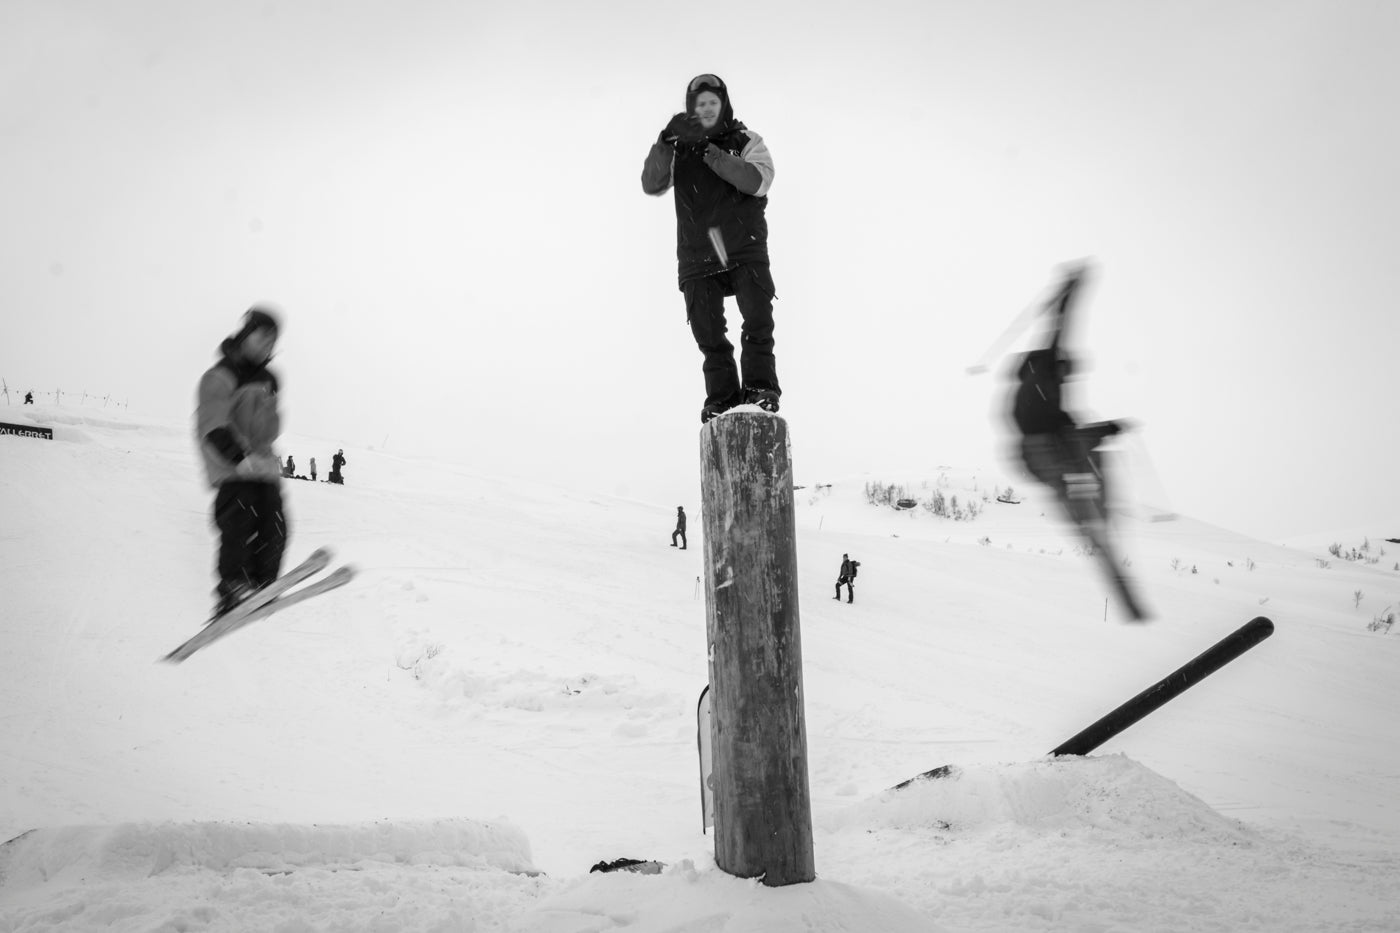 photographer on a post with skiers in the background